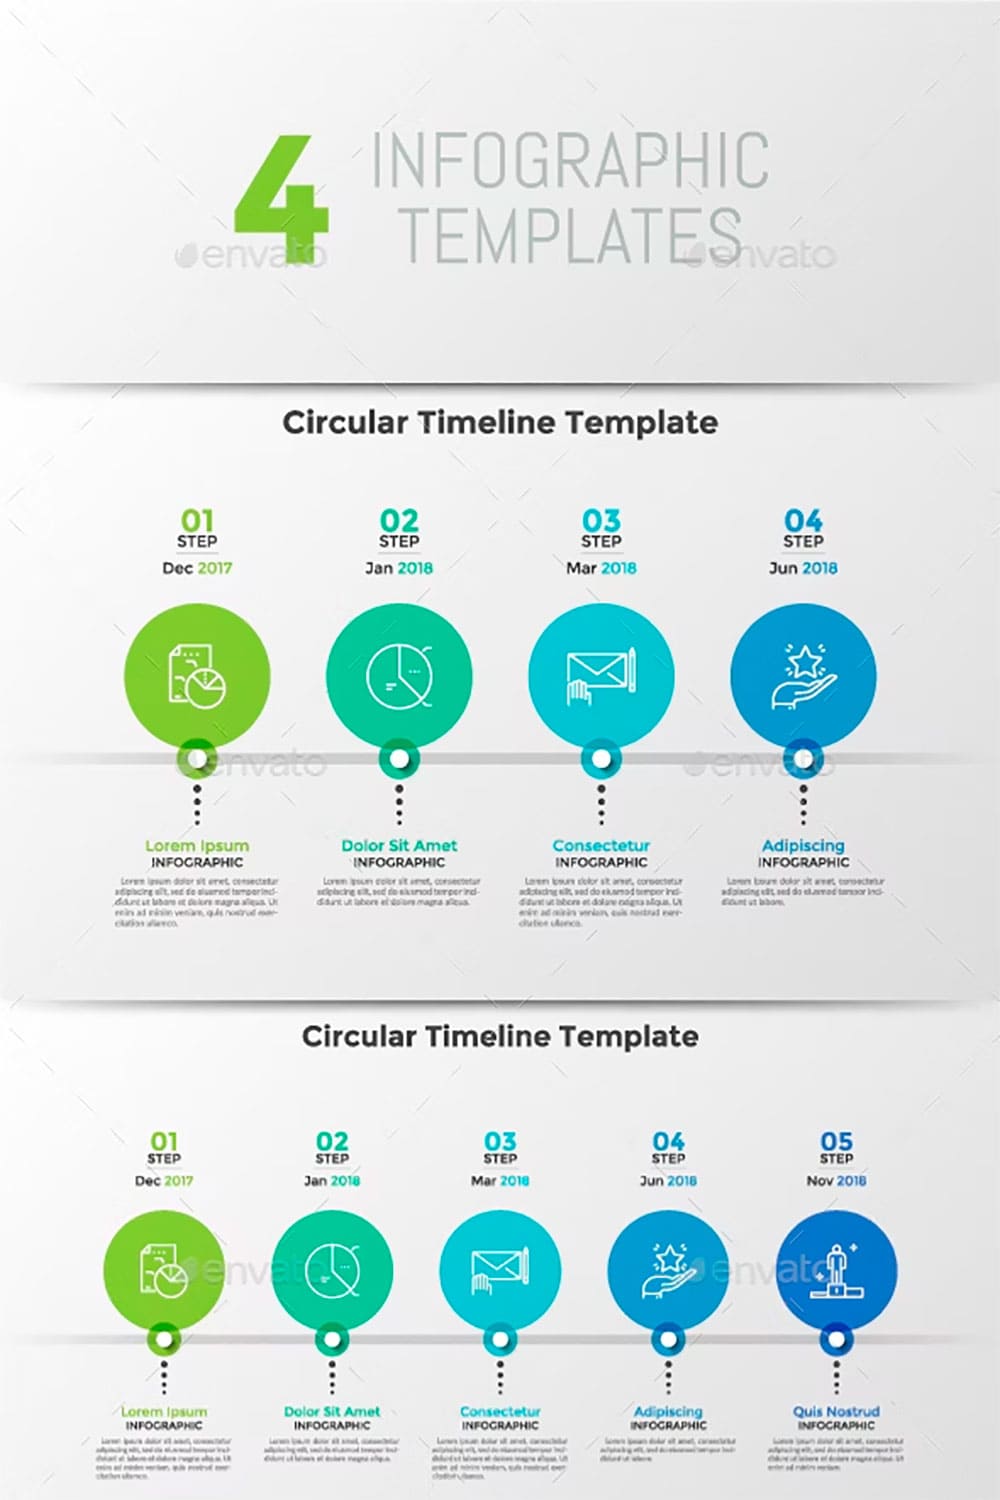 4 process infographic templates, picture for pinterest.